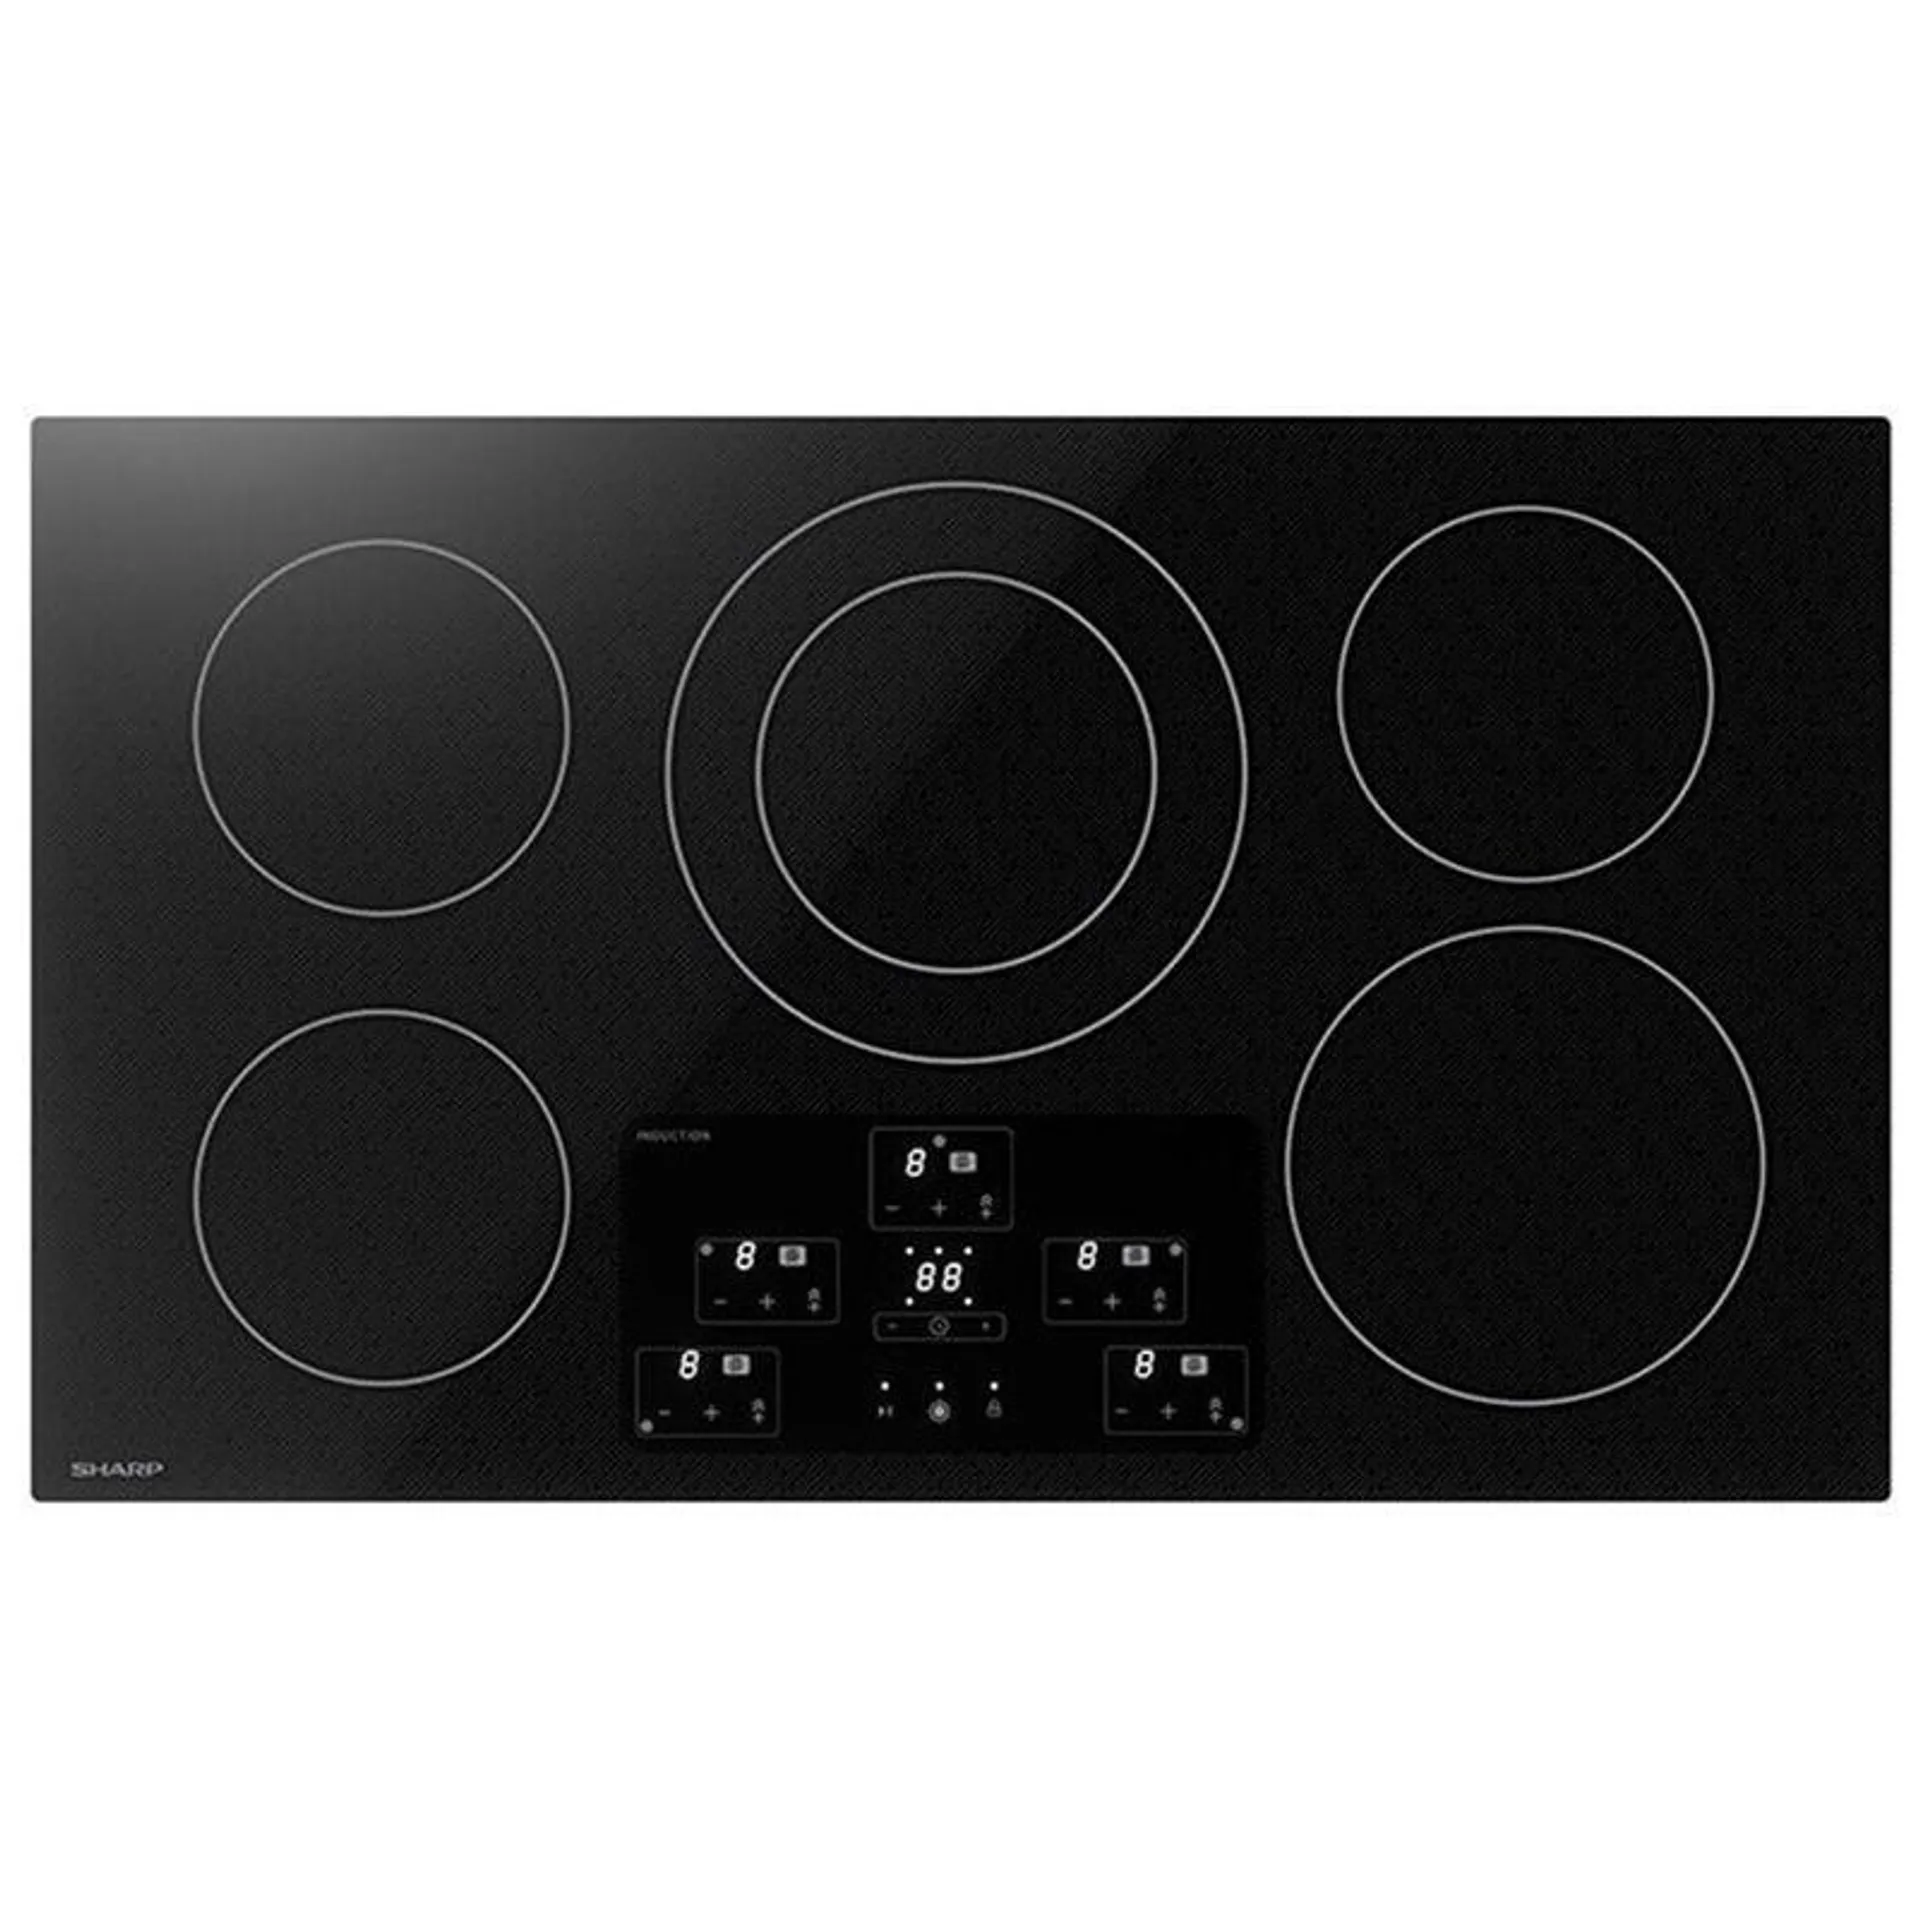 Sharp Contemporary Series 36 in. 5-Burner Induction Cooktop with Simmer Burner and Power Burner - Black